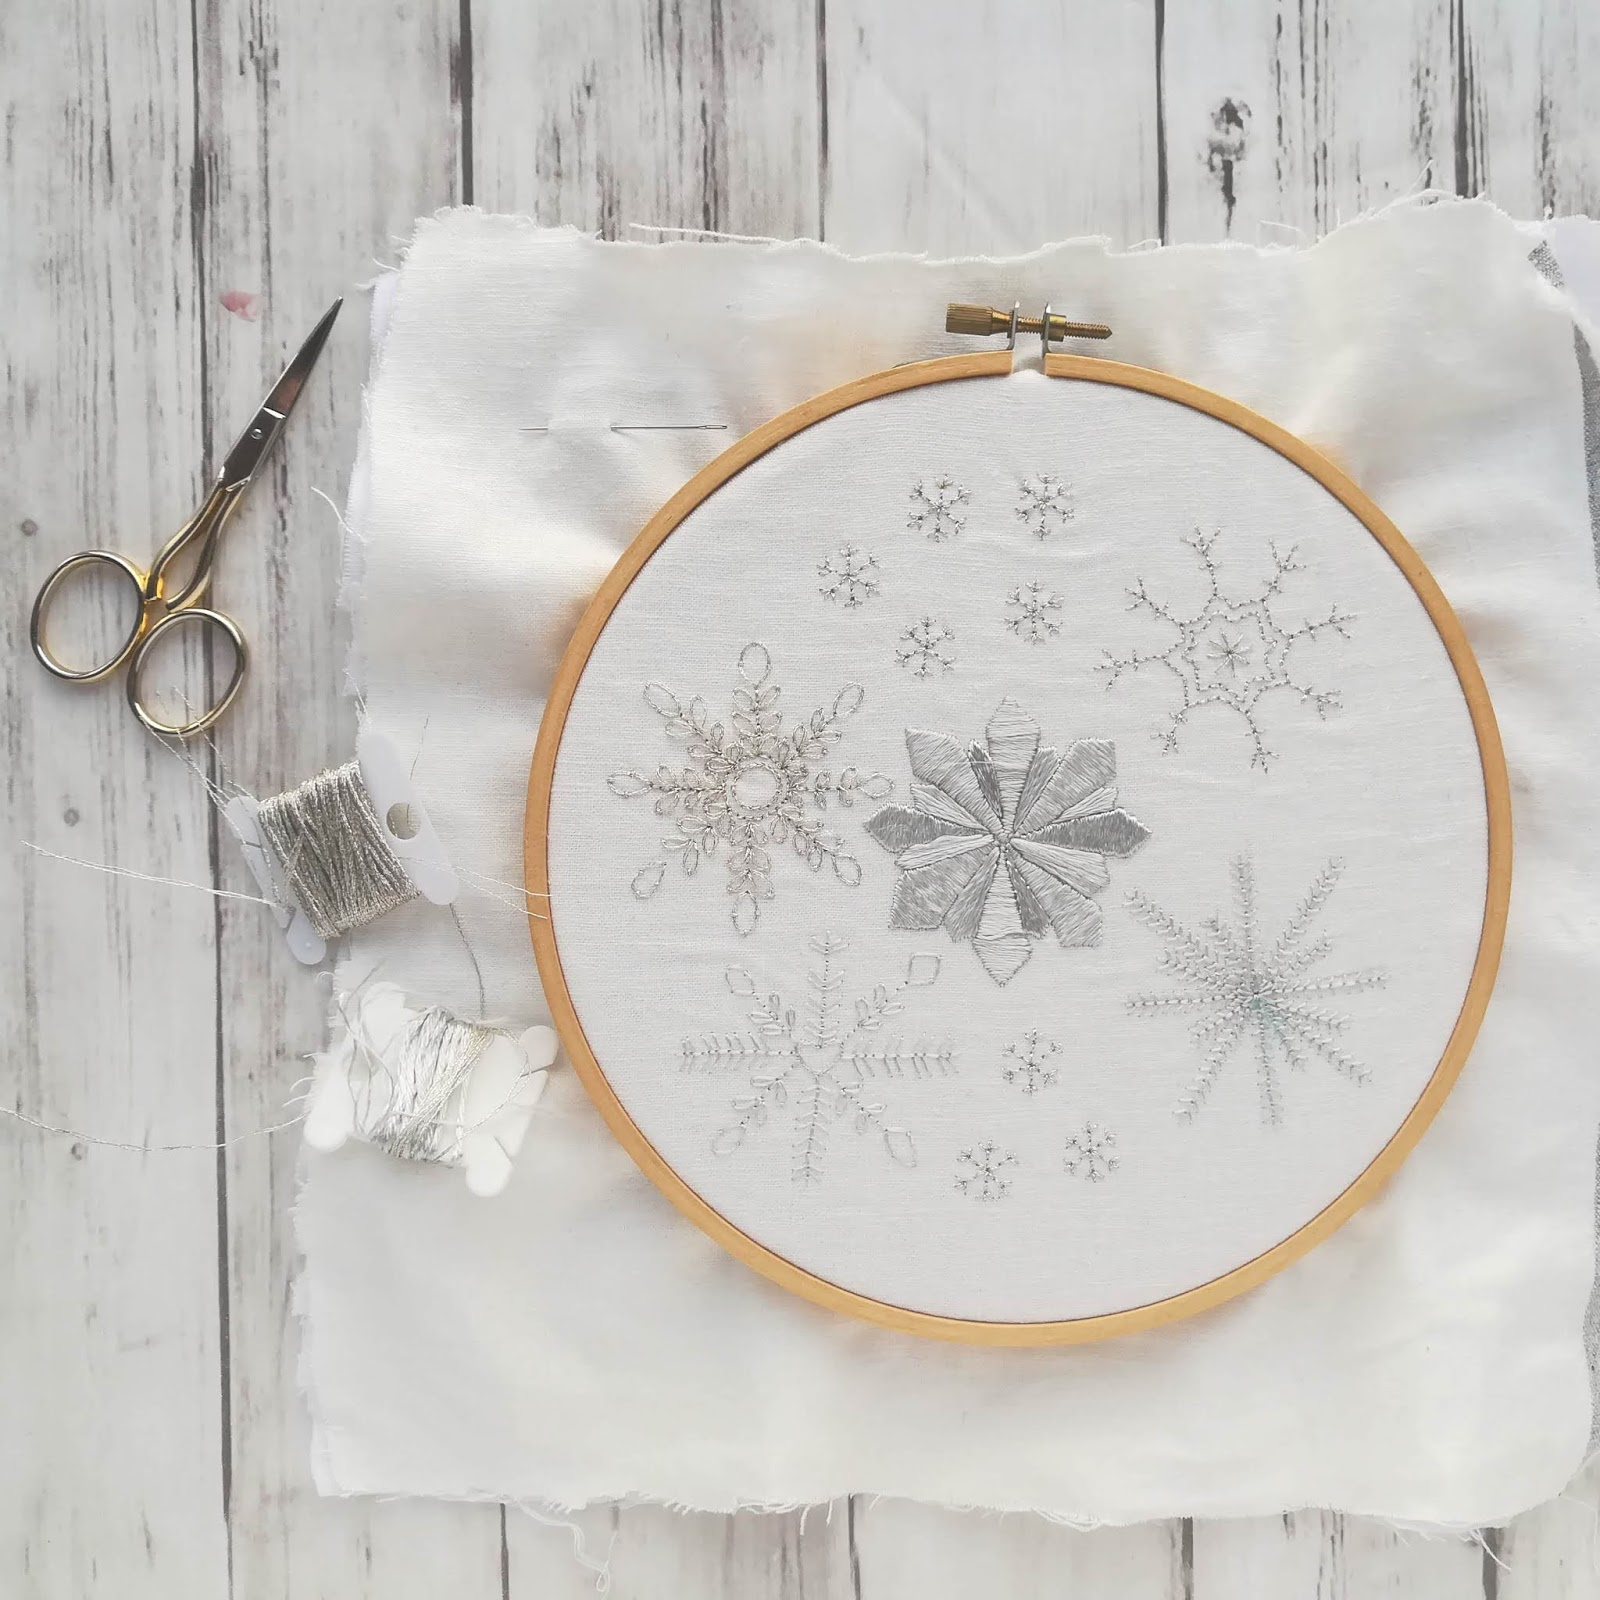 Snowflake Embroidery Pattern A Lively Hope Snowflakes Hand Embroidery Pattern Free